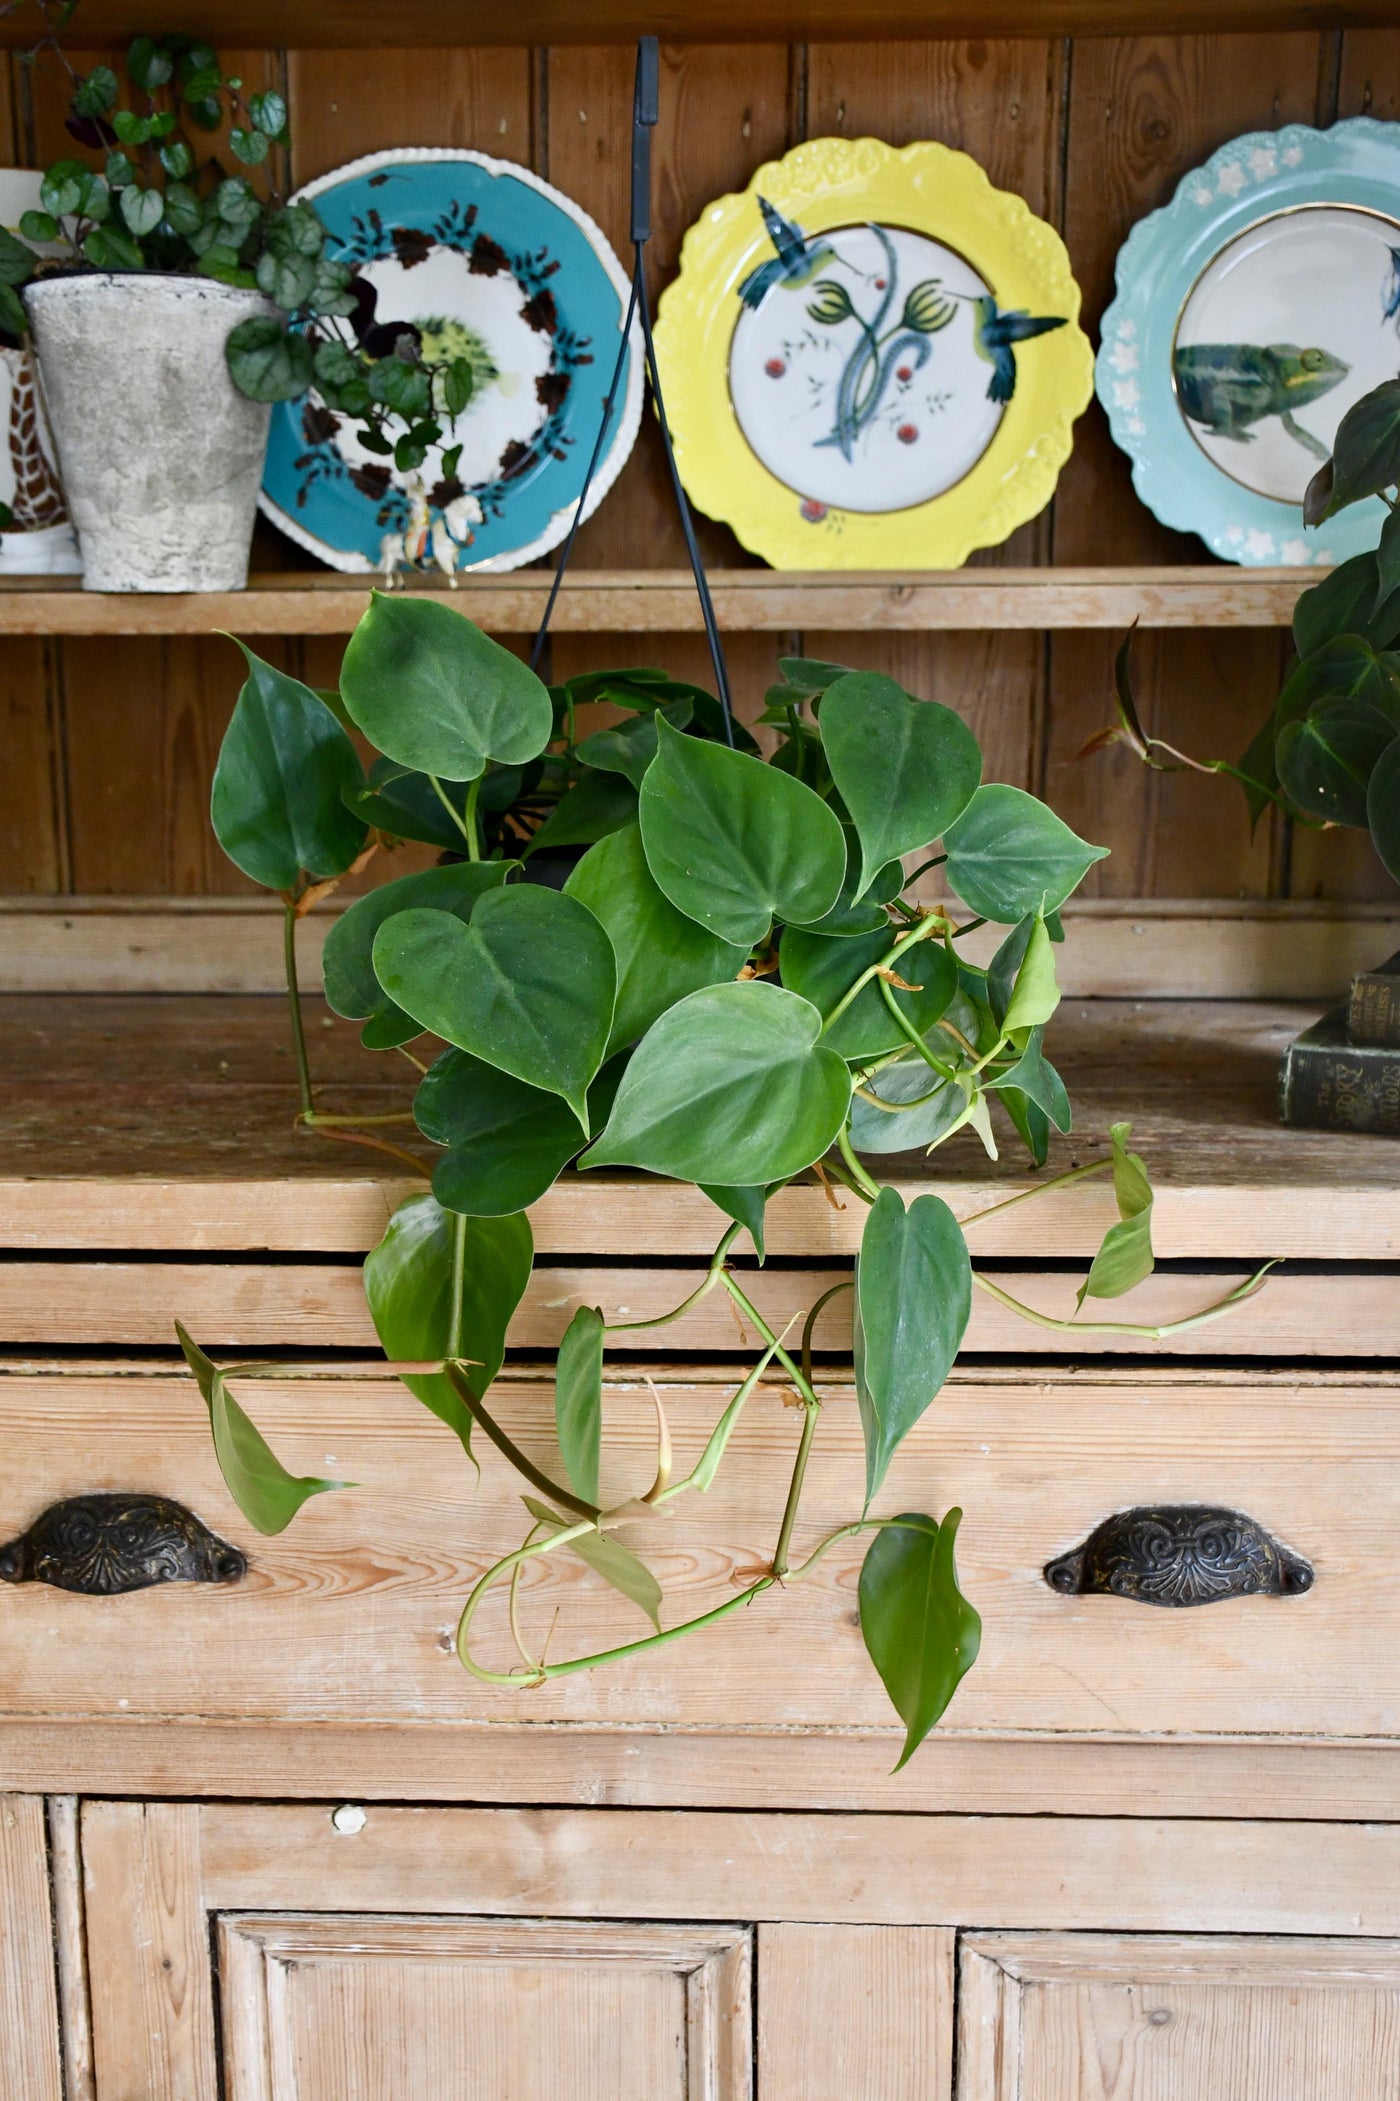 Philodendron Scandens